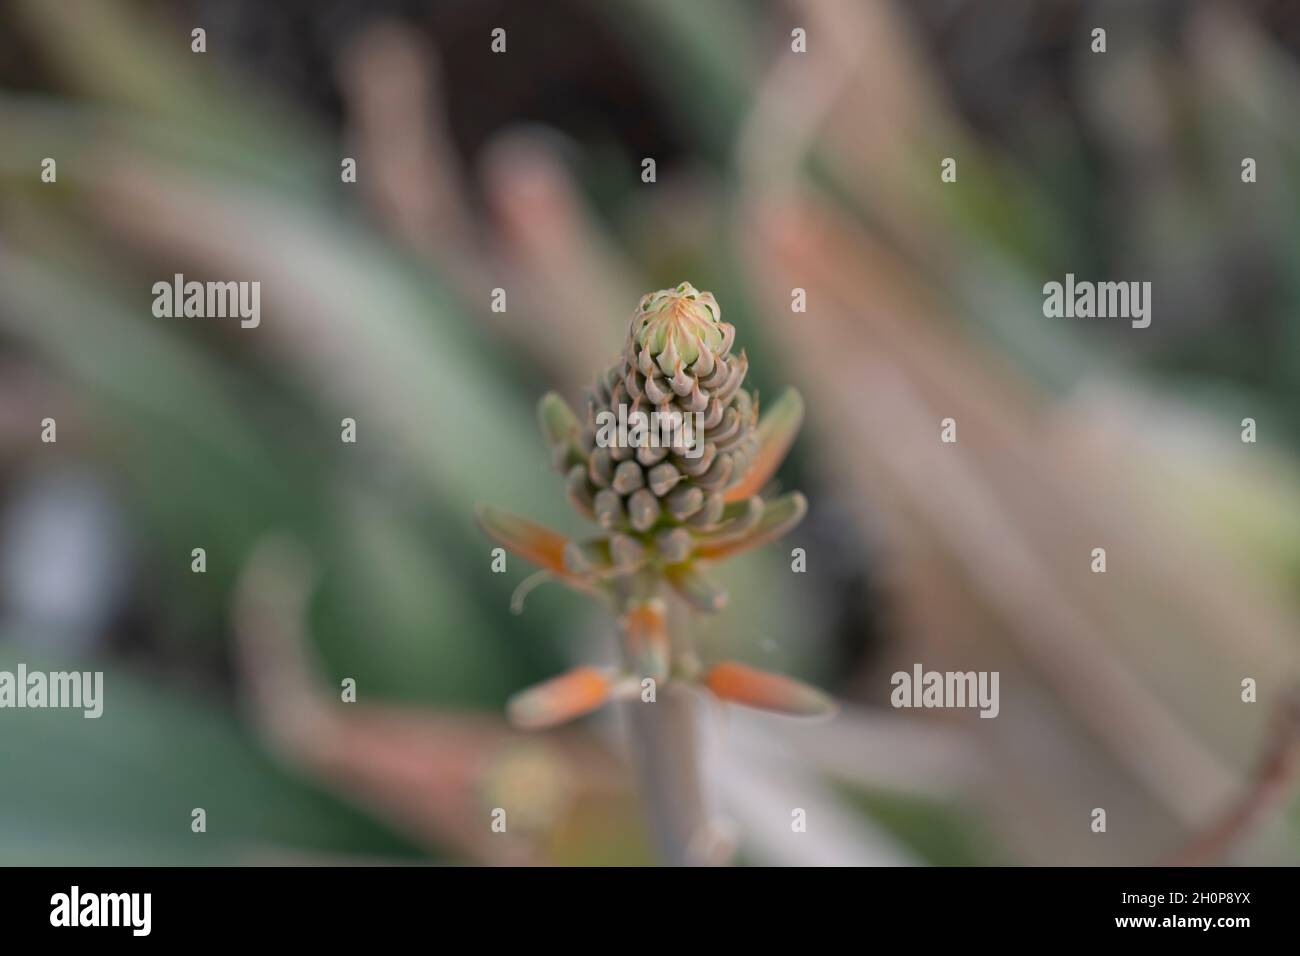 Close up of a flower bud of Aloe brevifolia plant, in the family Asphodelaceae native to the Western Cape, South Africa Stock Photo